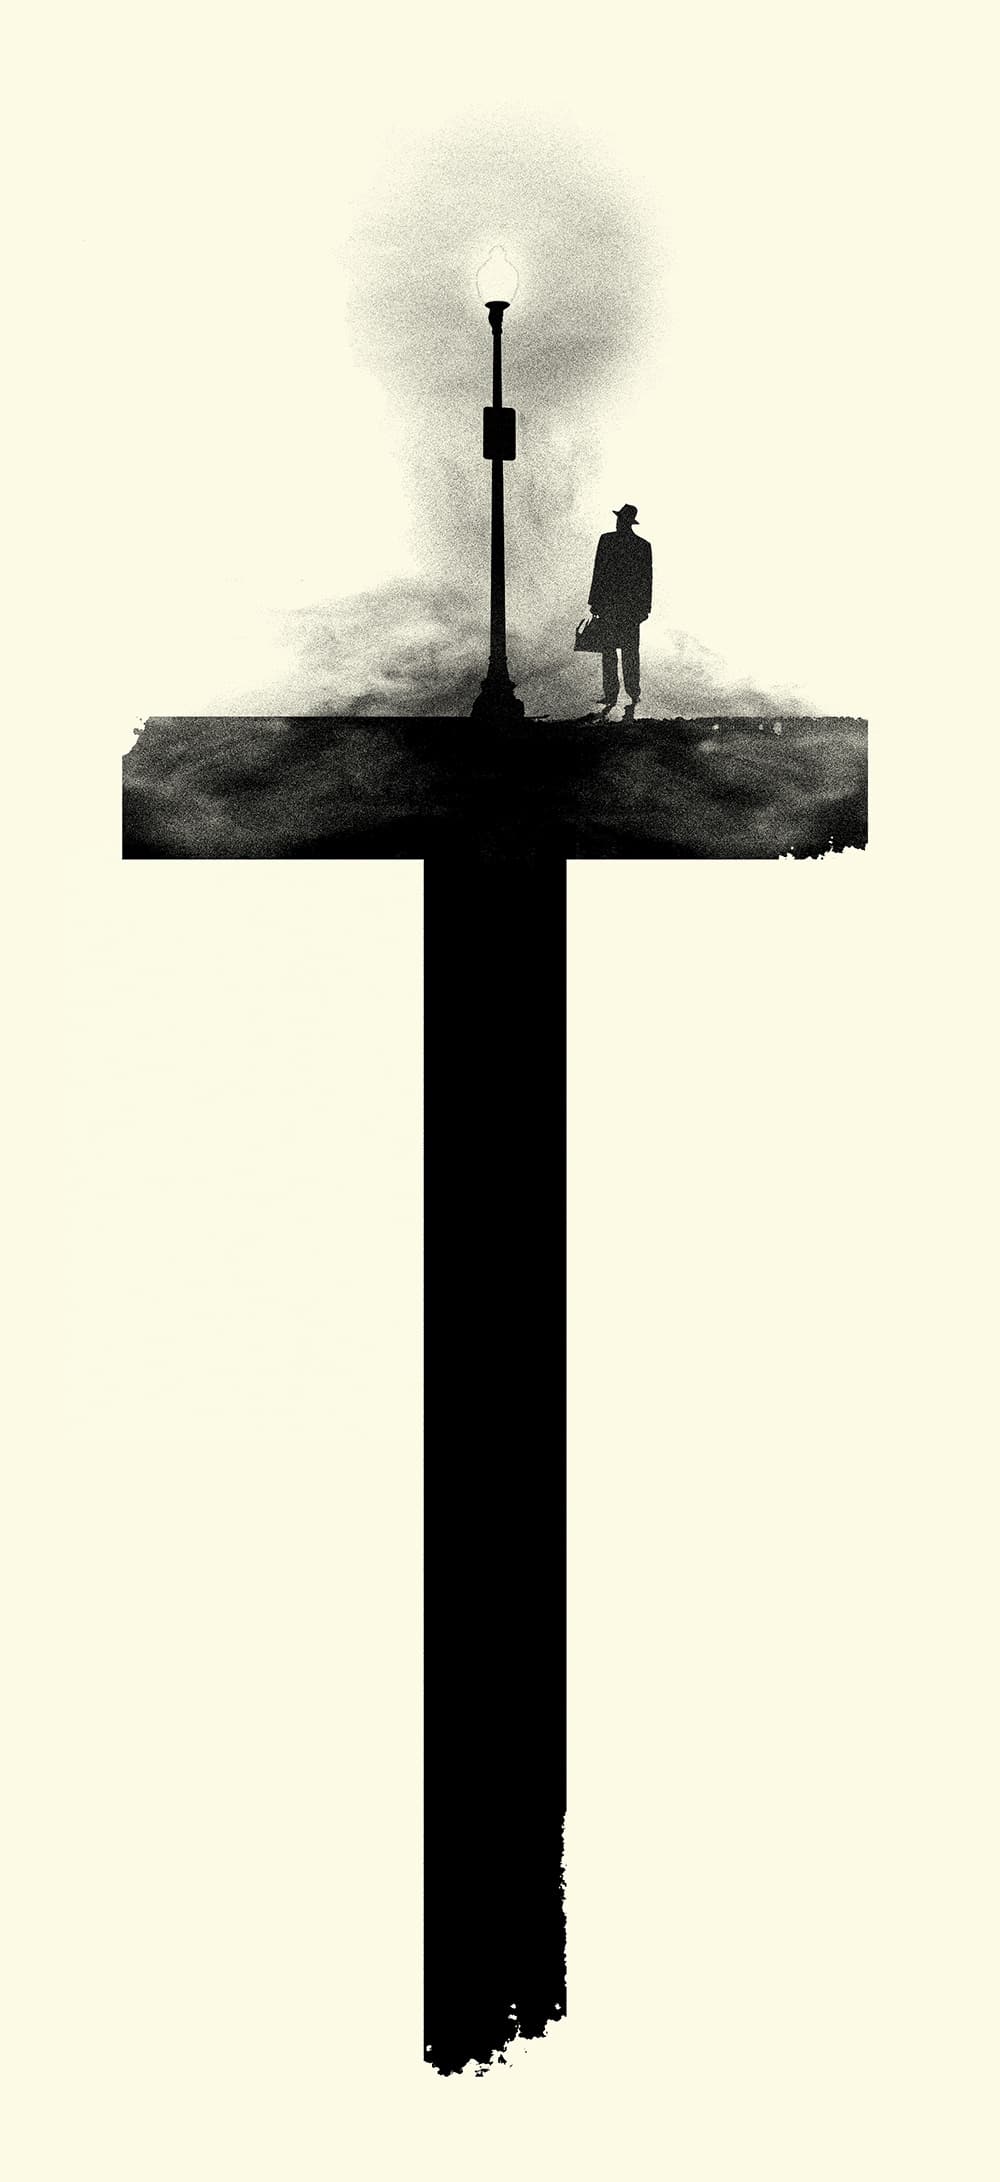 “The Cross” Print Inspired by The Exorcist